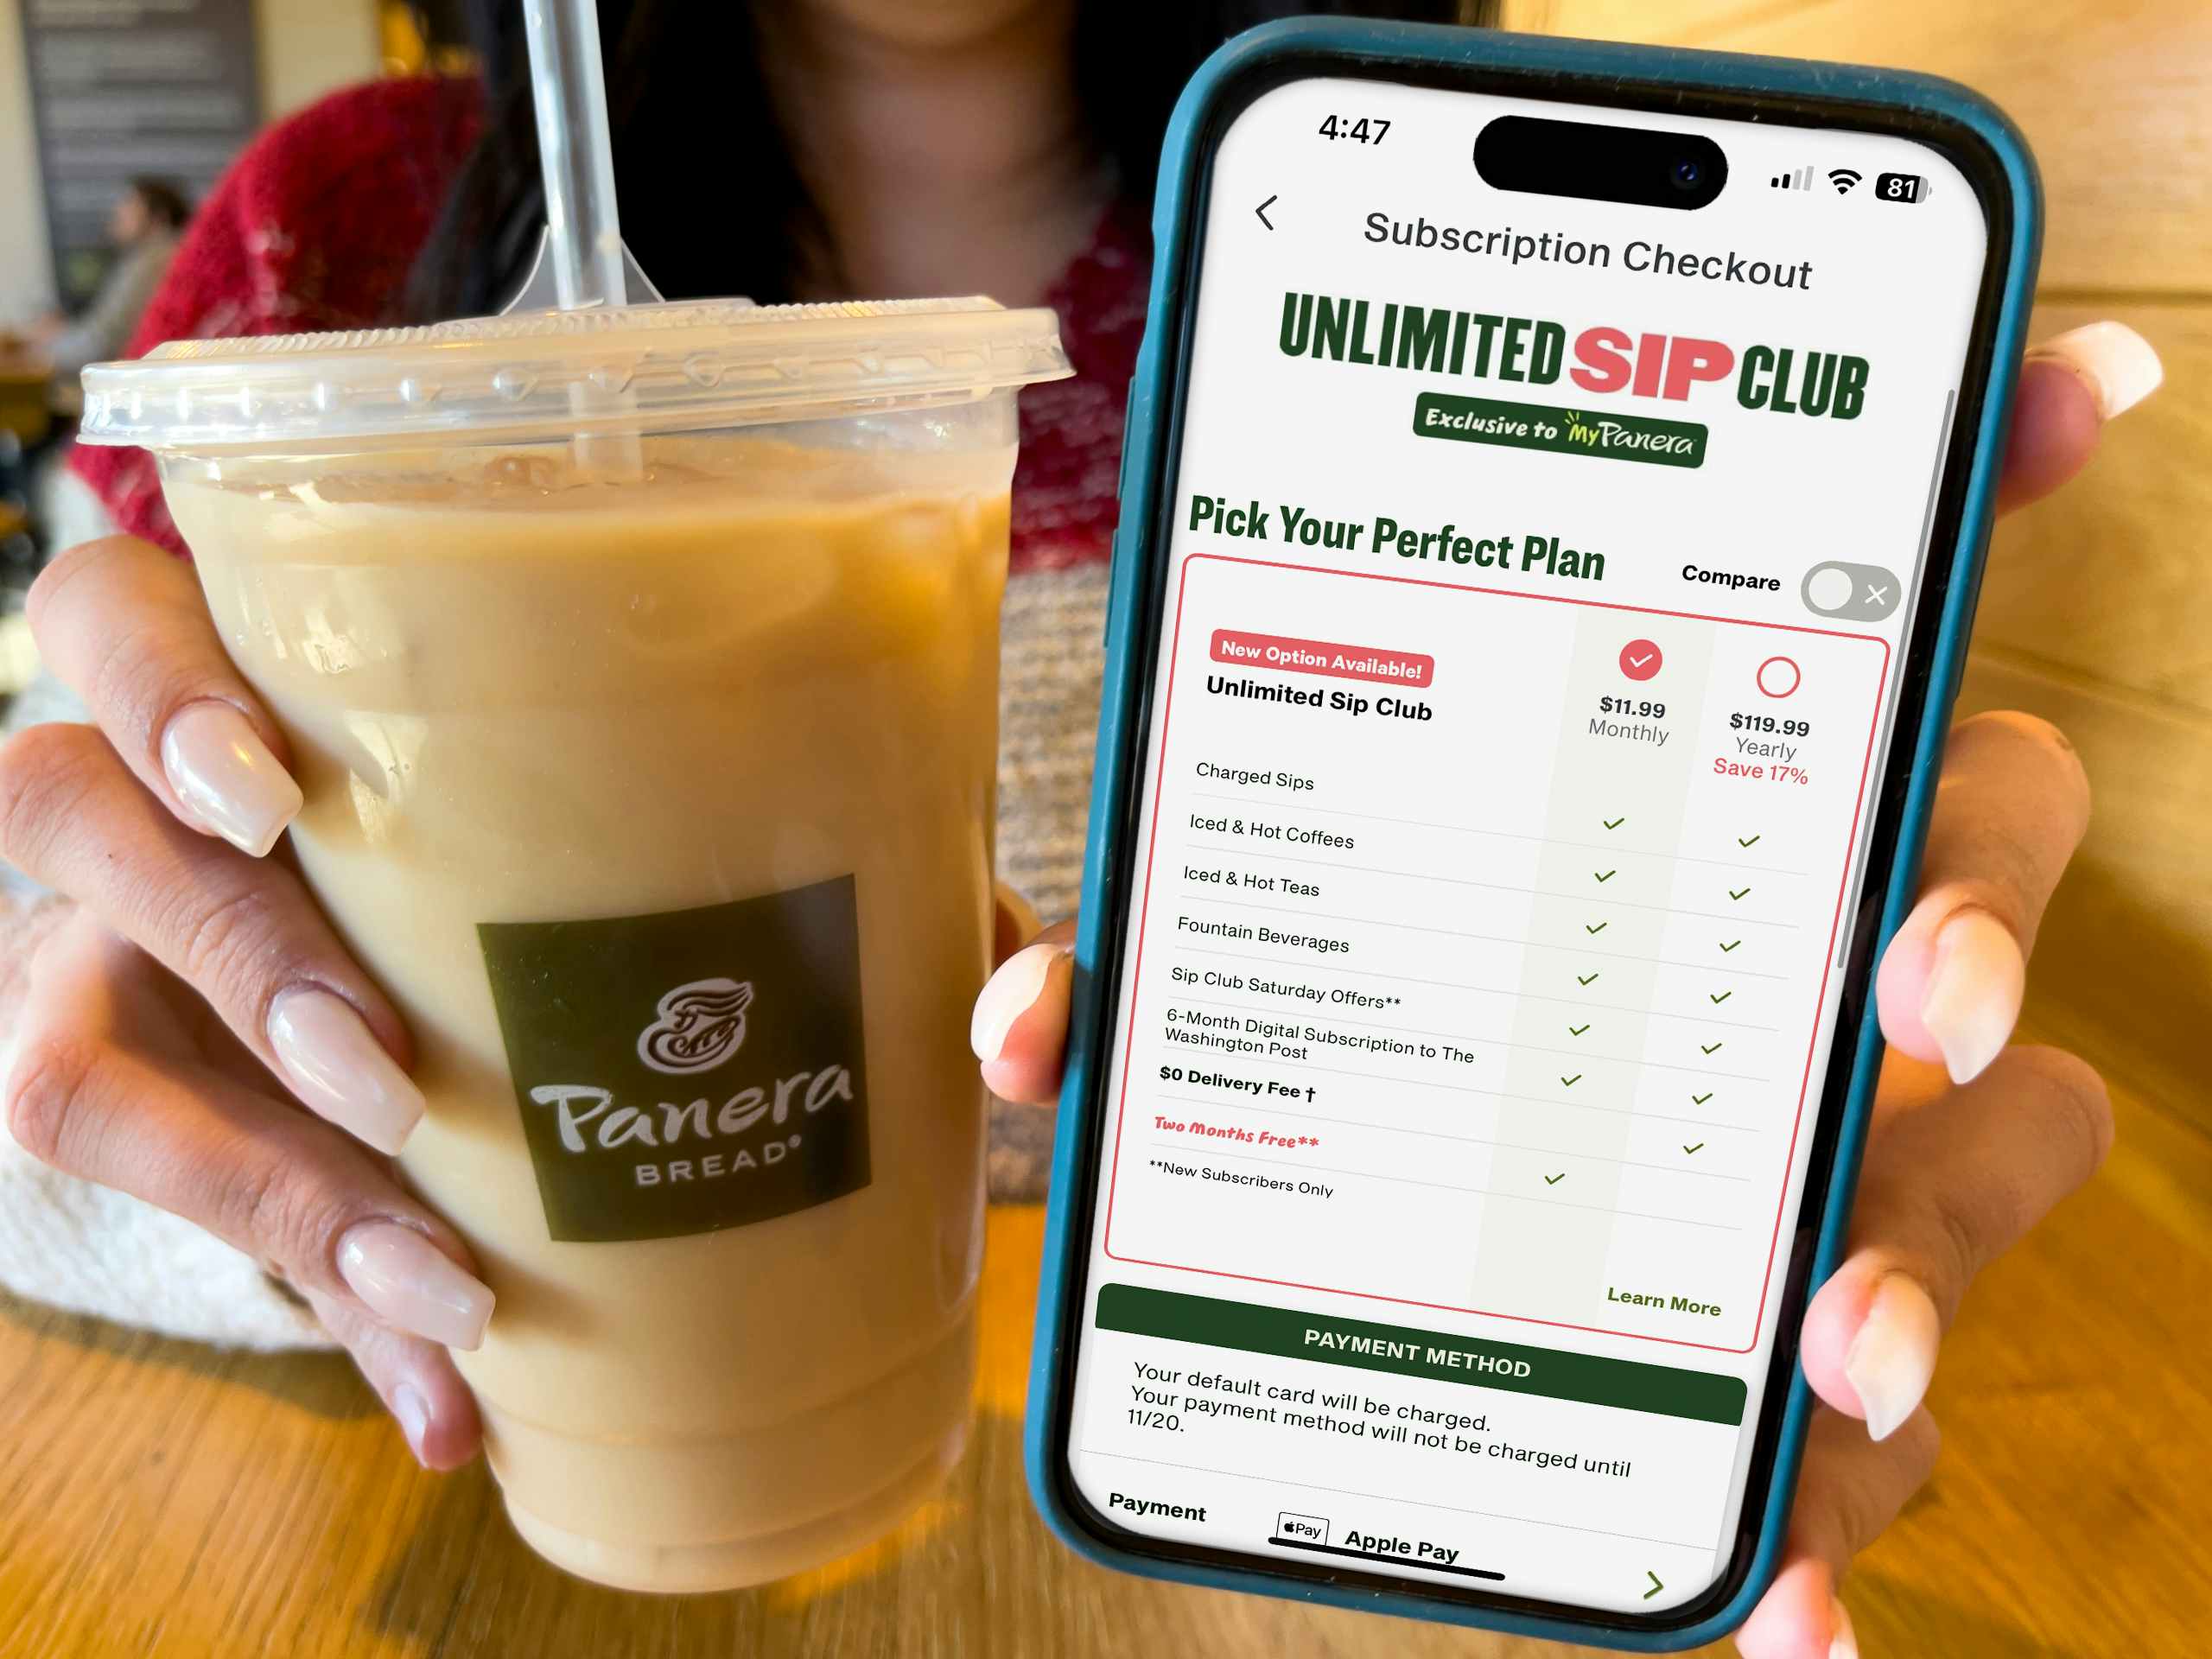 A woman holding an iced coffee in a panera cup next to a cell phone displaying a deal for the unlimited sip club on the panera app.